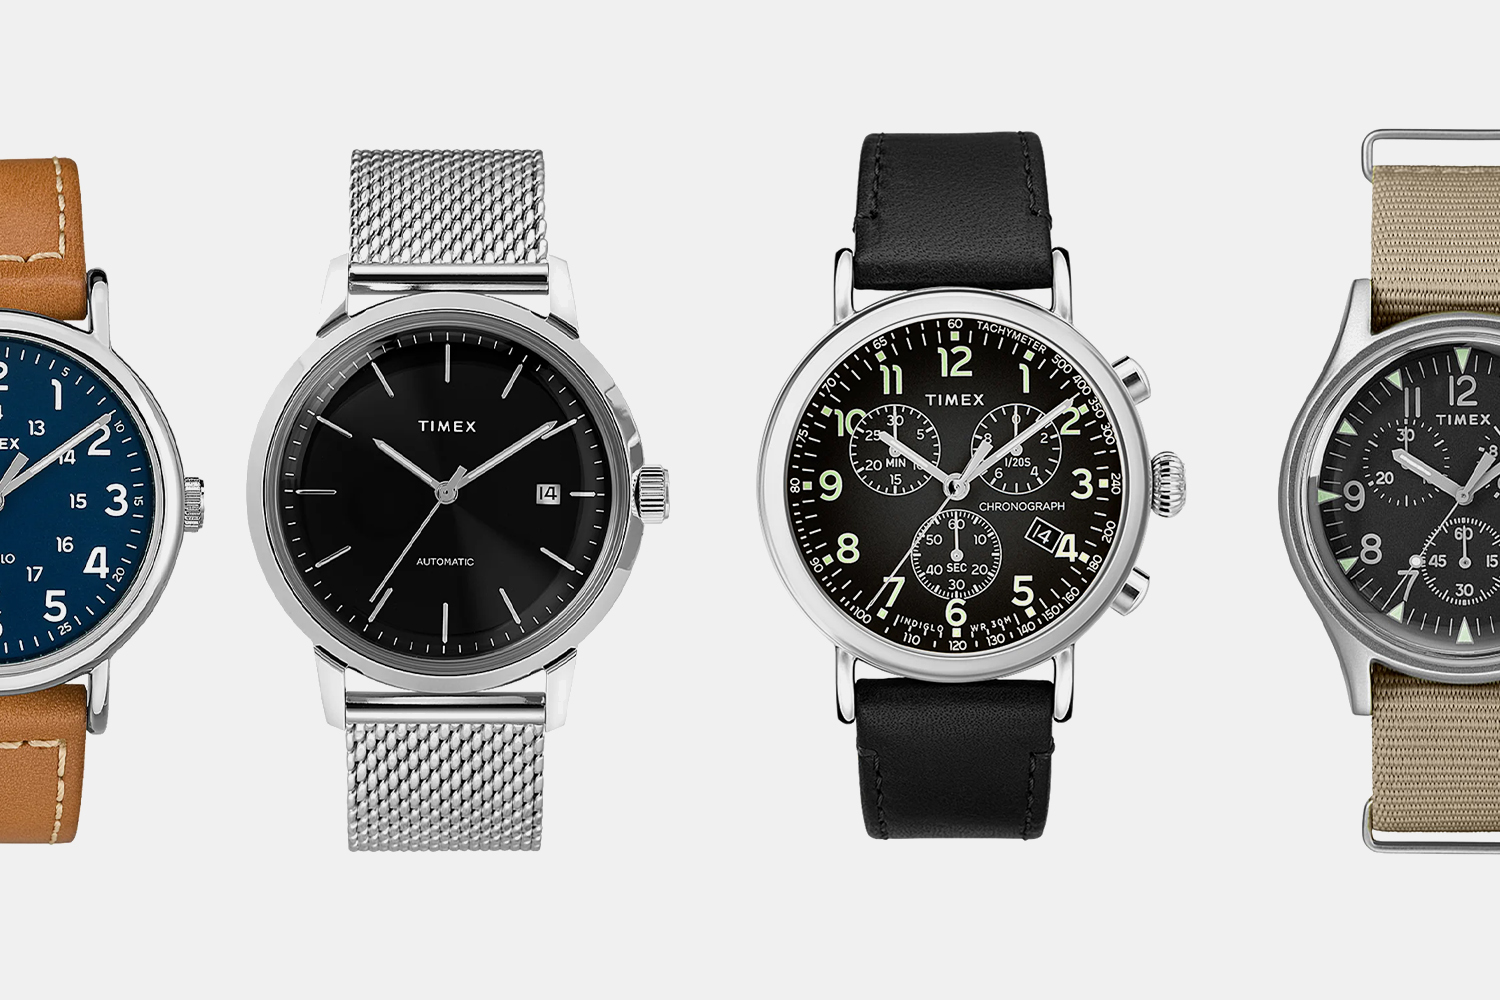 Timex Has Your Next Watch at Up to 50% Off - InsideHook